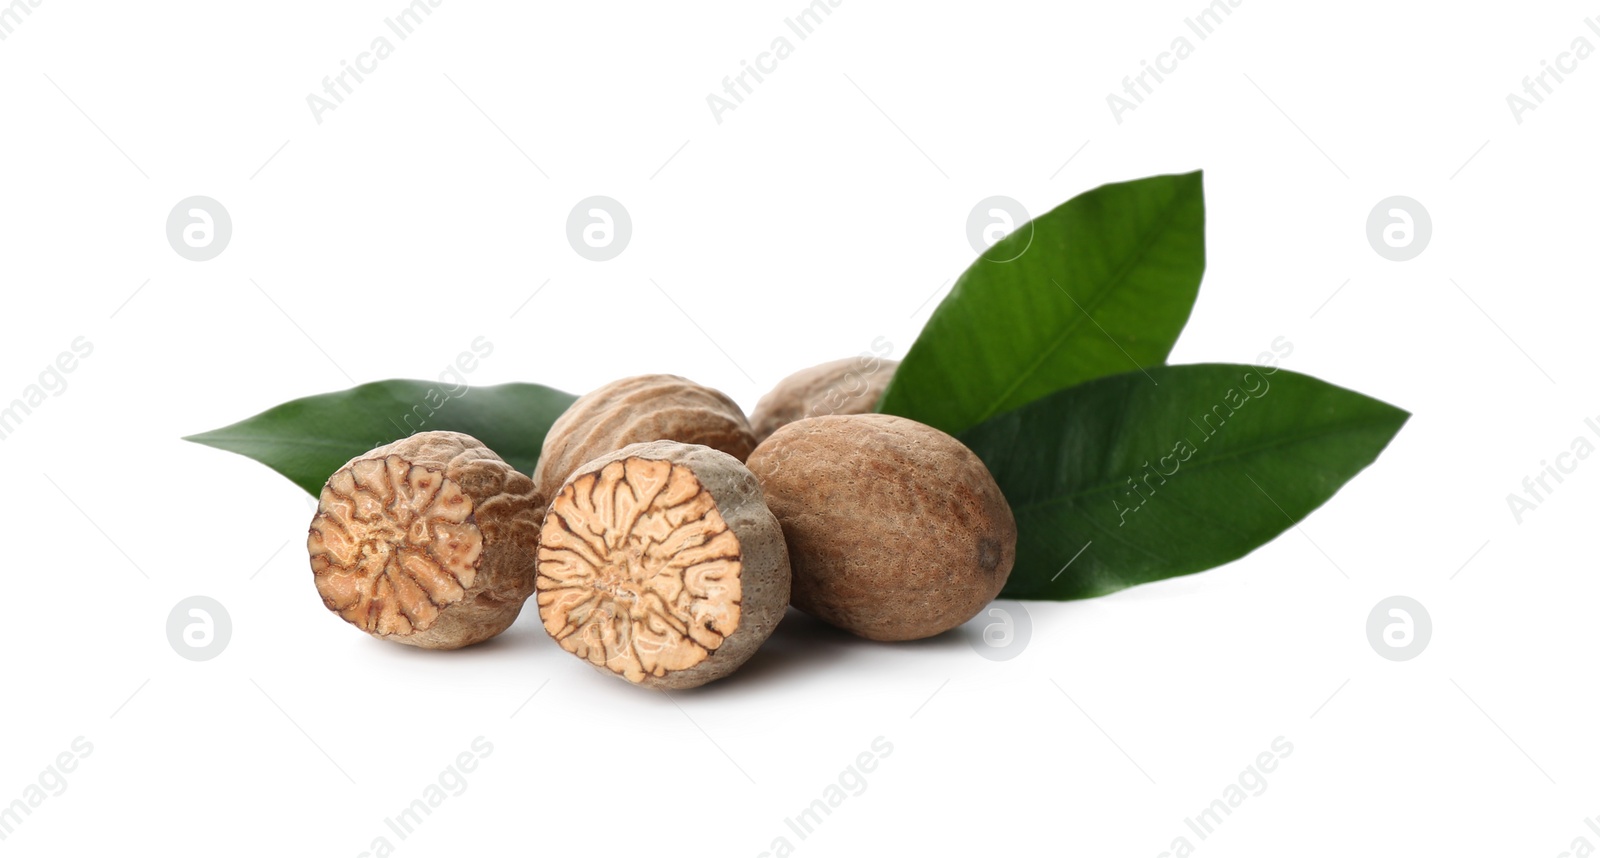 Photo of Nutmeg seeds with green leaves on white background